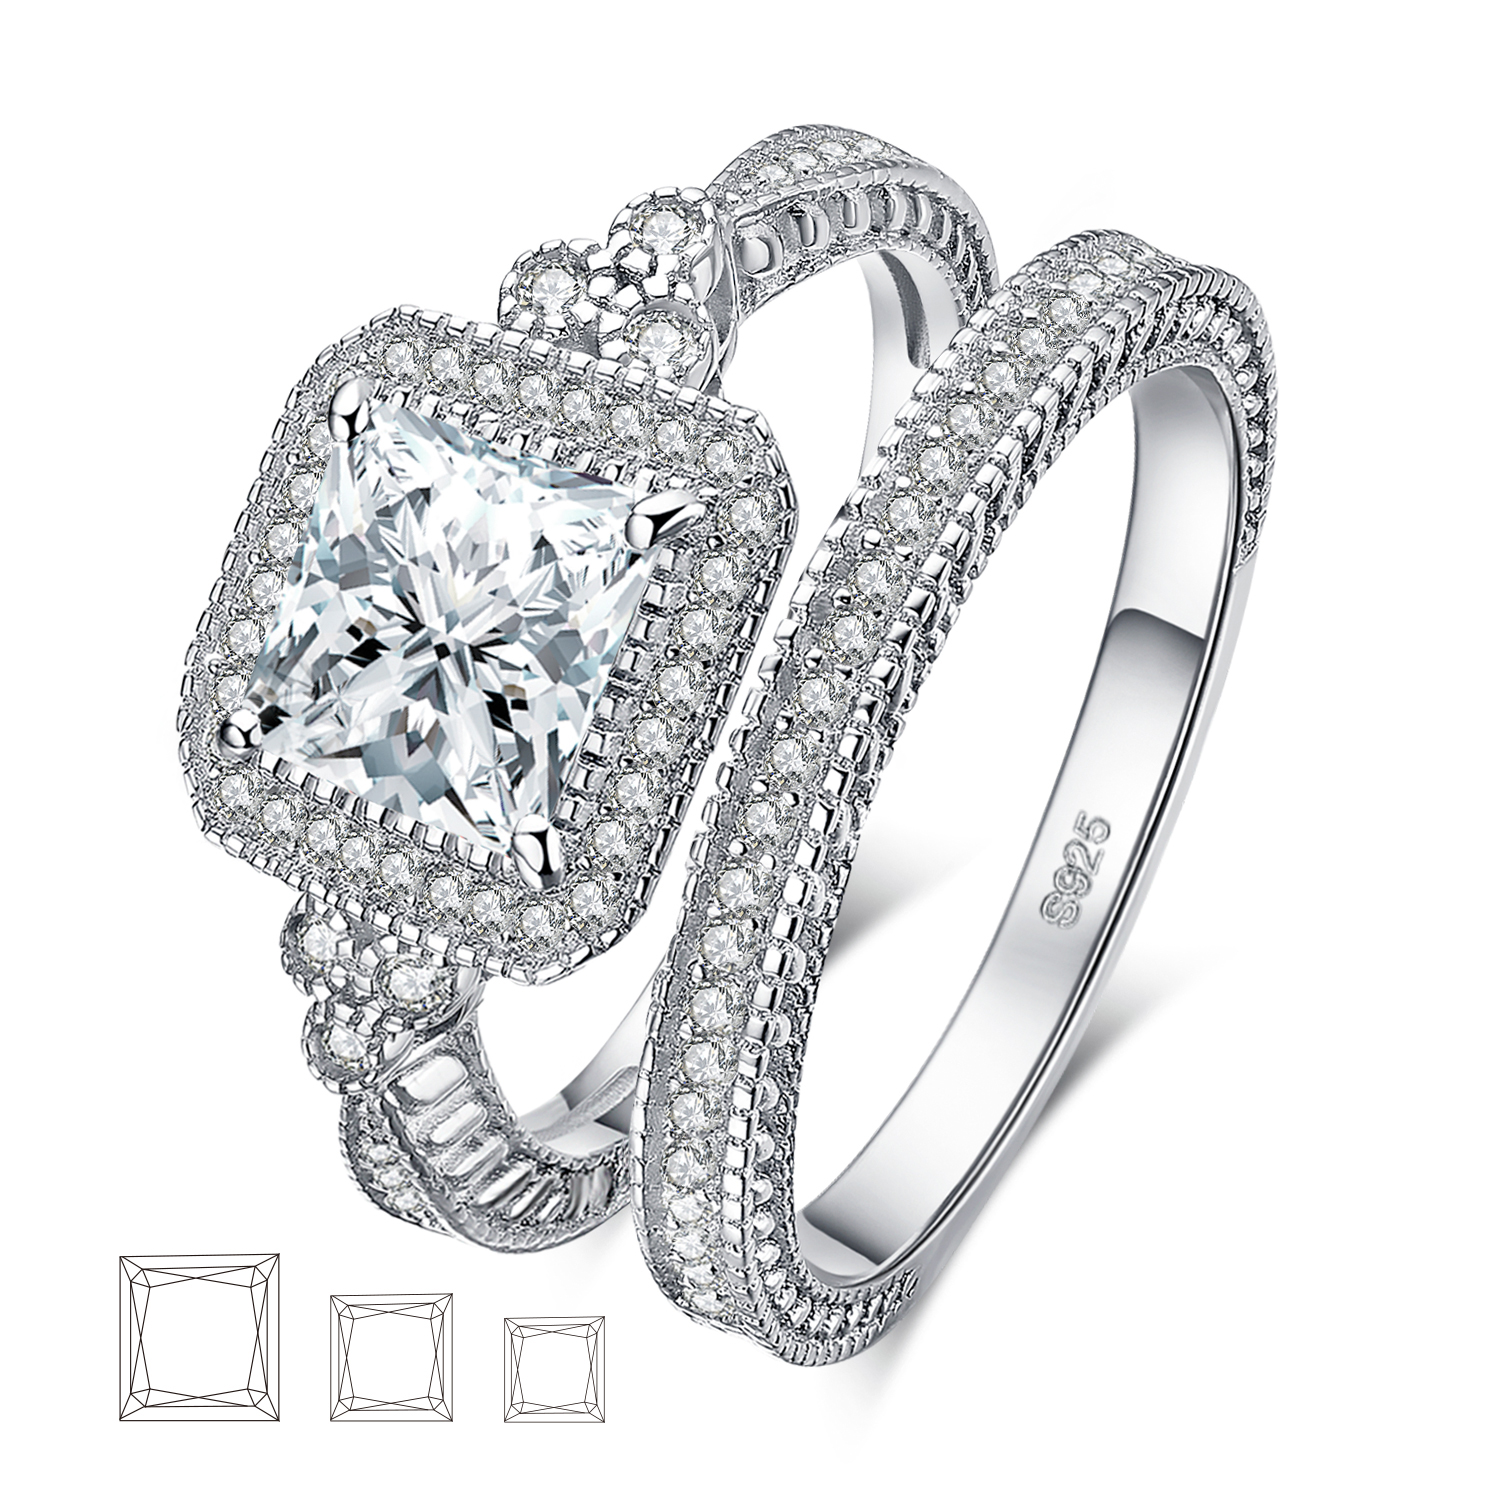 WEDDING ENGAGEMENT RING – JewelryPalace